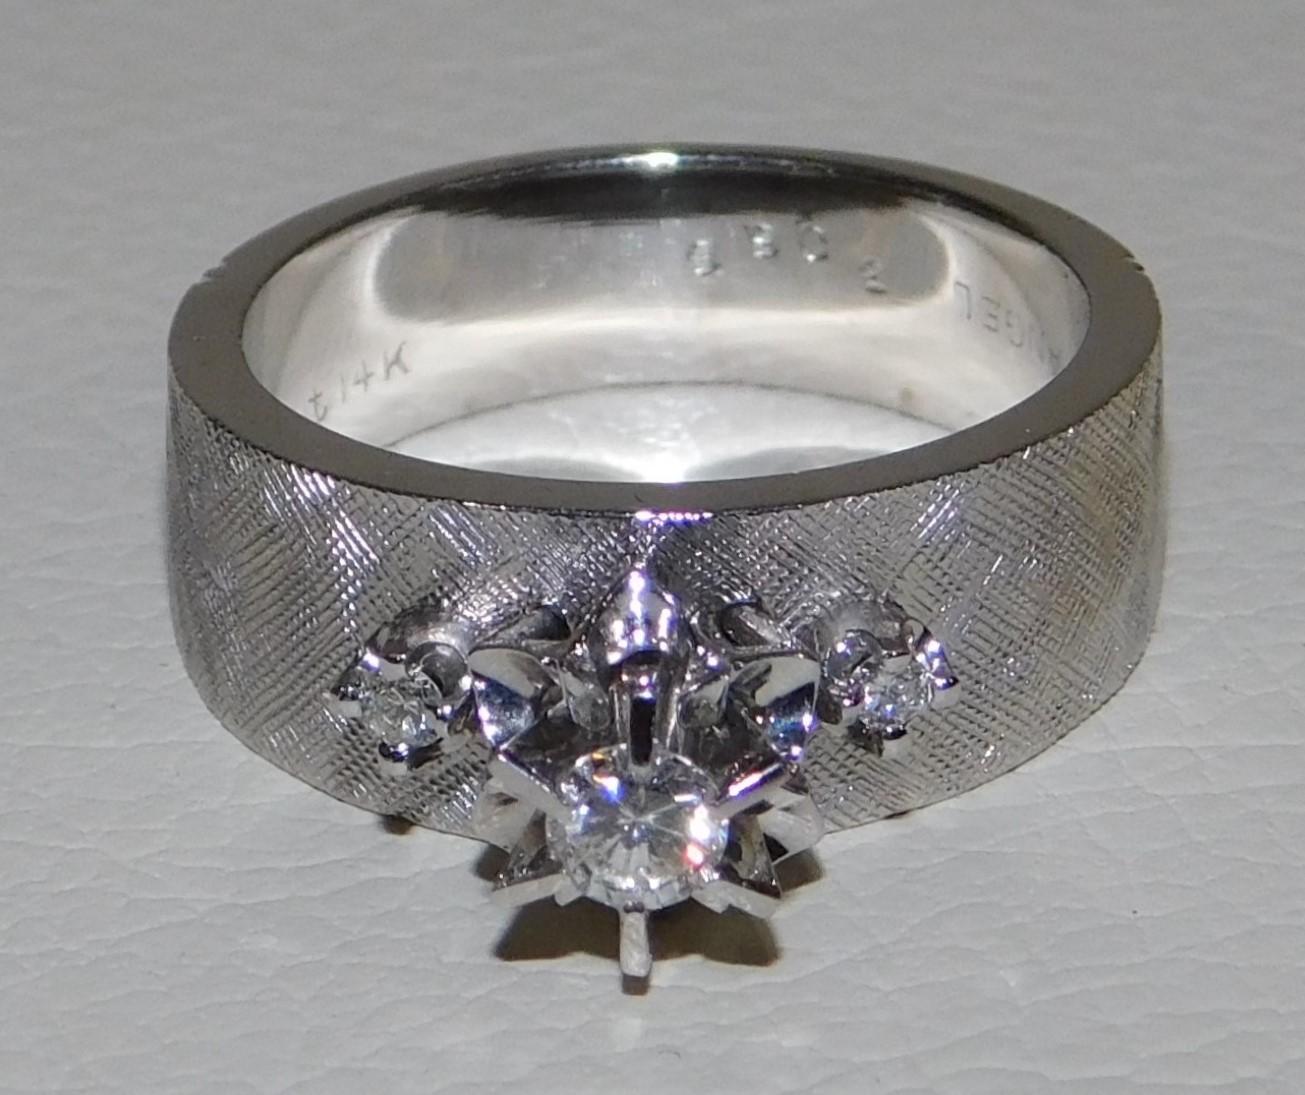 Lady's stamped 14-karat gold diamond ring with a bright polish and textured finish in very good condition. Three stone design, main stone is a raised with star like detail around. One diamond set on each shoulder. Shank measures approximately 7.15mm